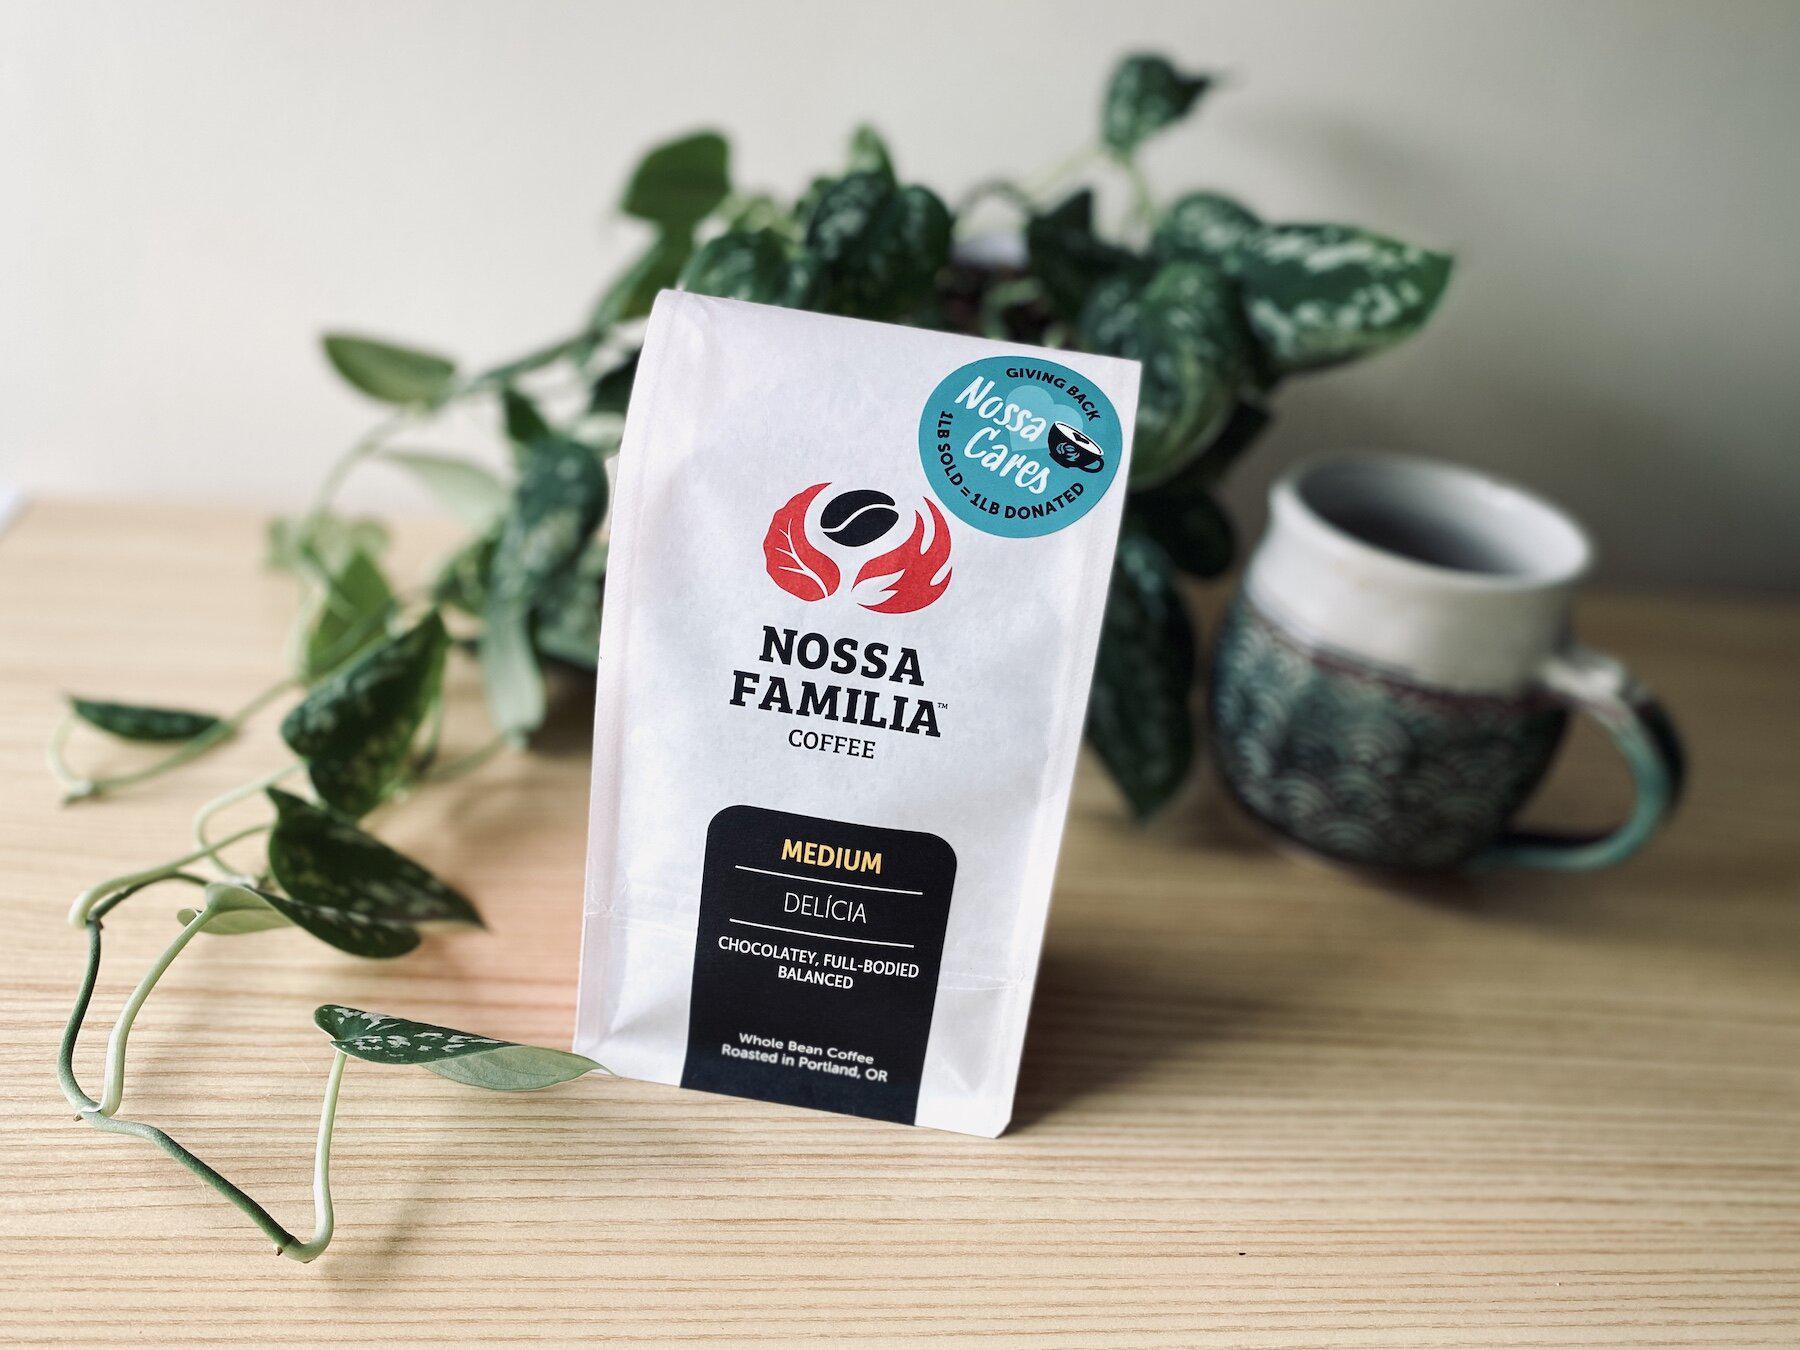 Introducing Nossa Cares: Delícia is Now a One-for-One Coffee